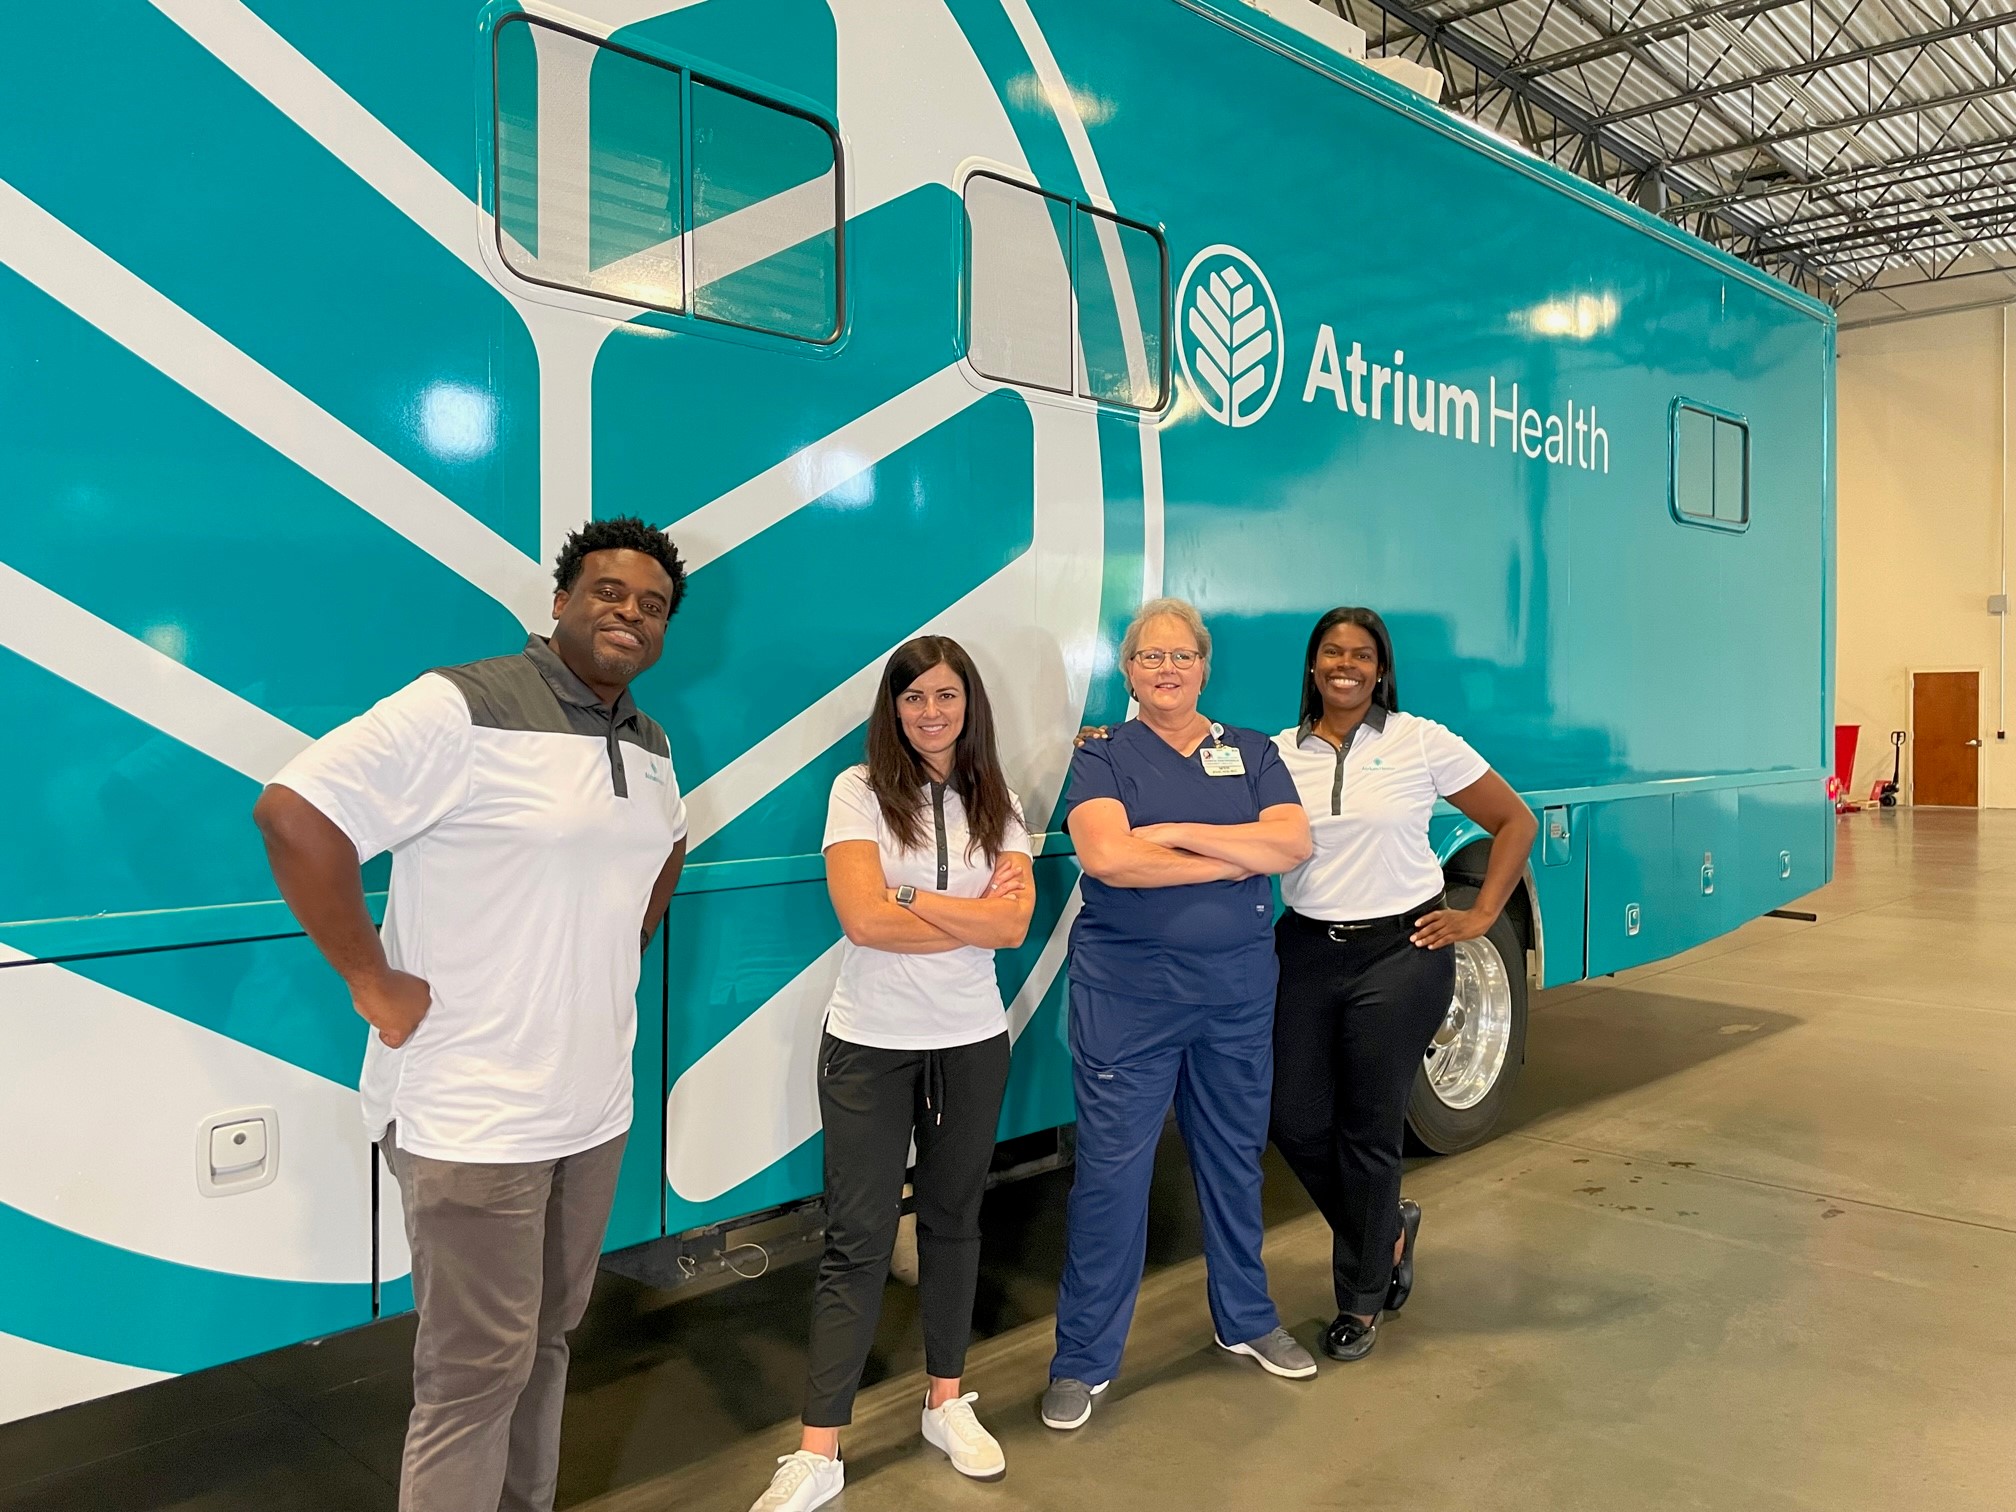 Media Advisory: Atrium Health Launches New Mobile Medicine Unit With Support from The Tepper Foundation